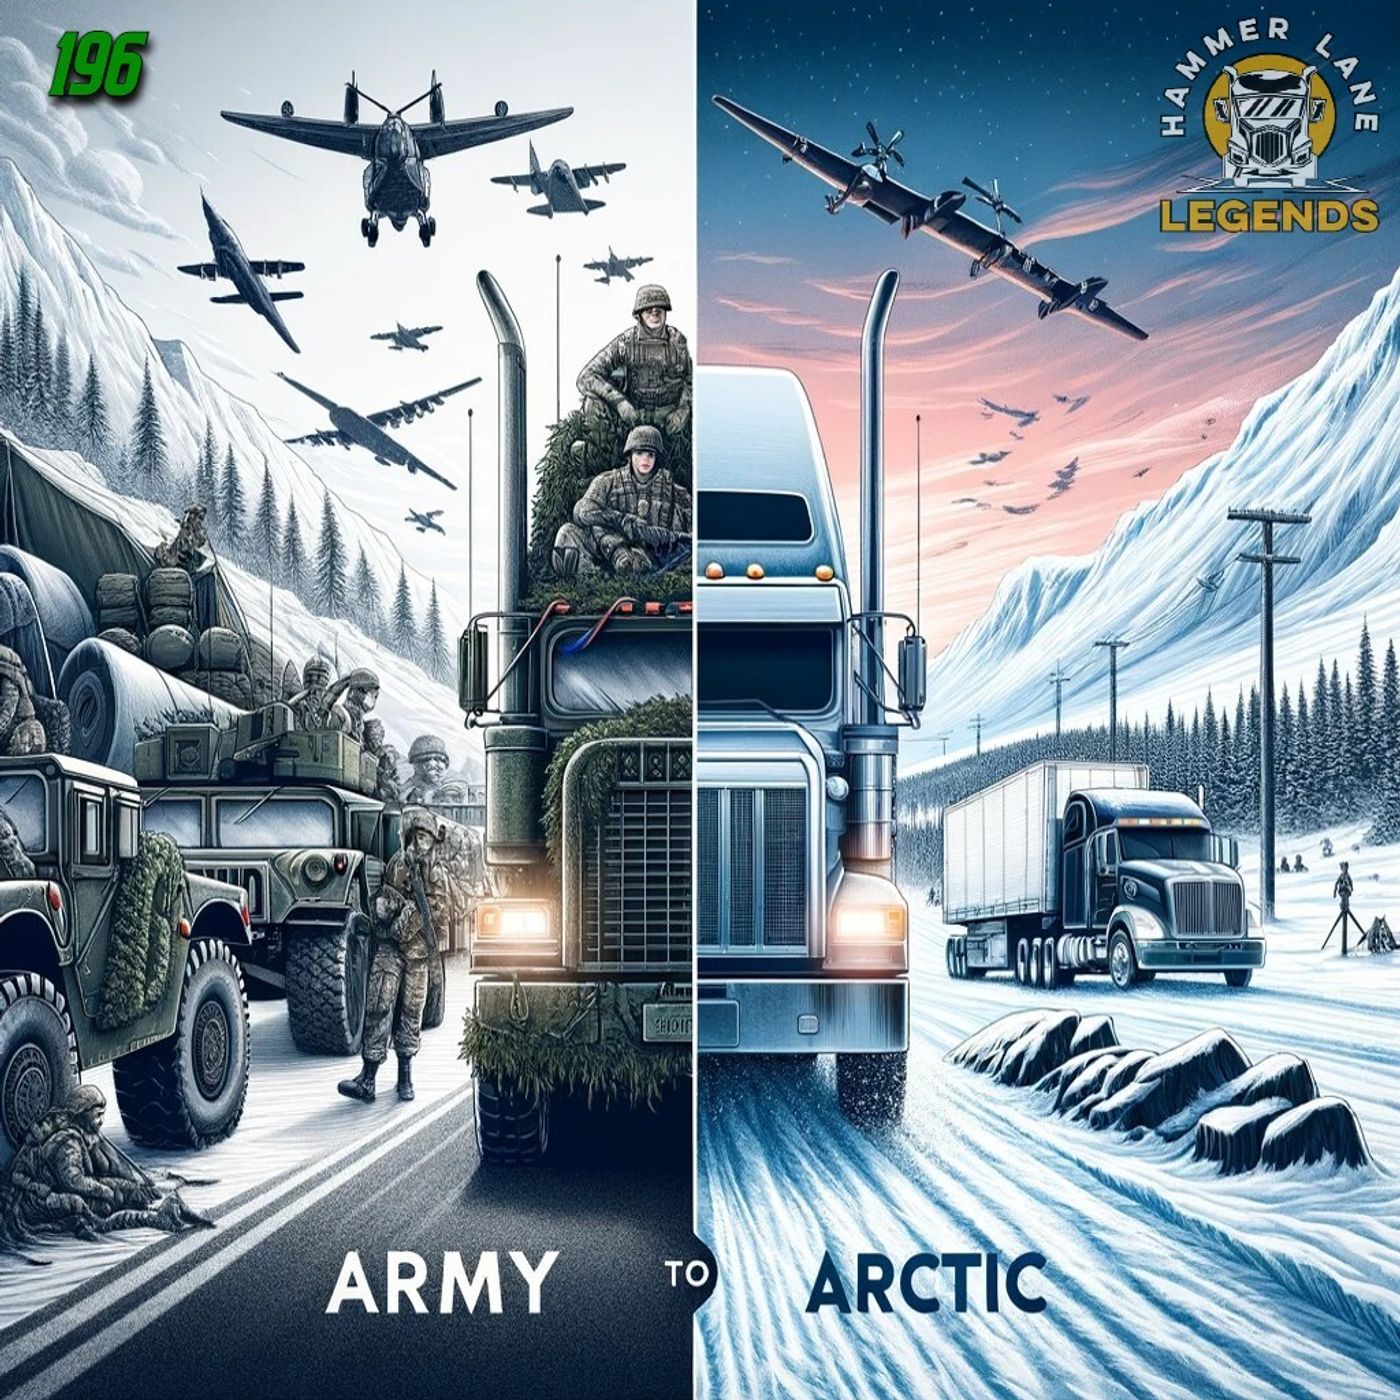 196: Army To Arctic